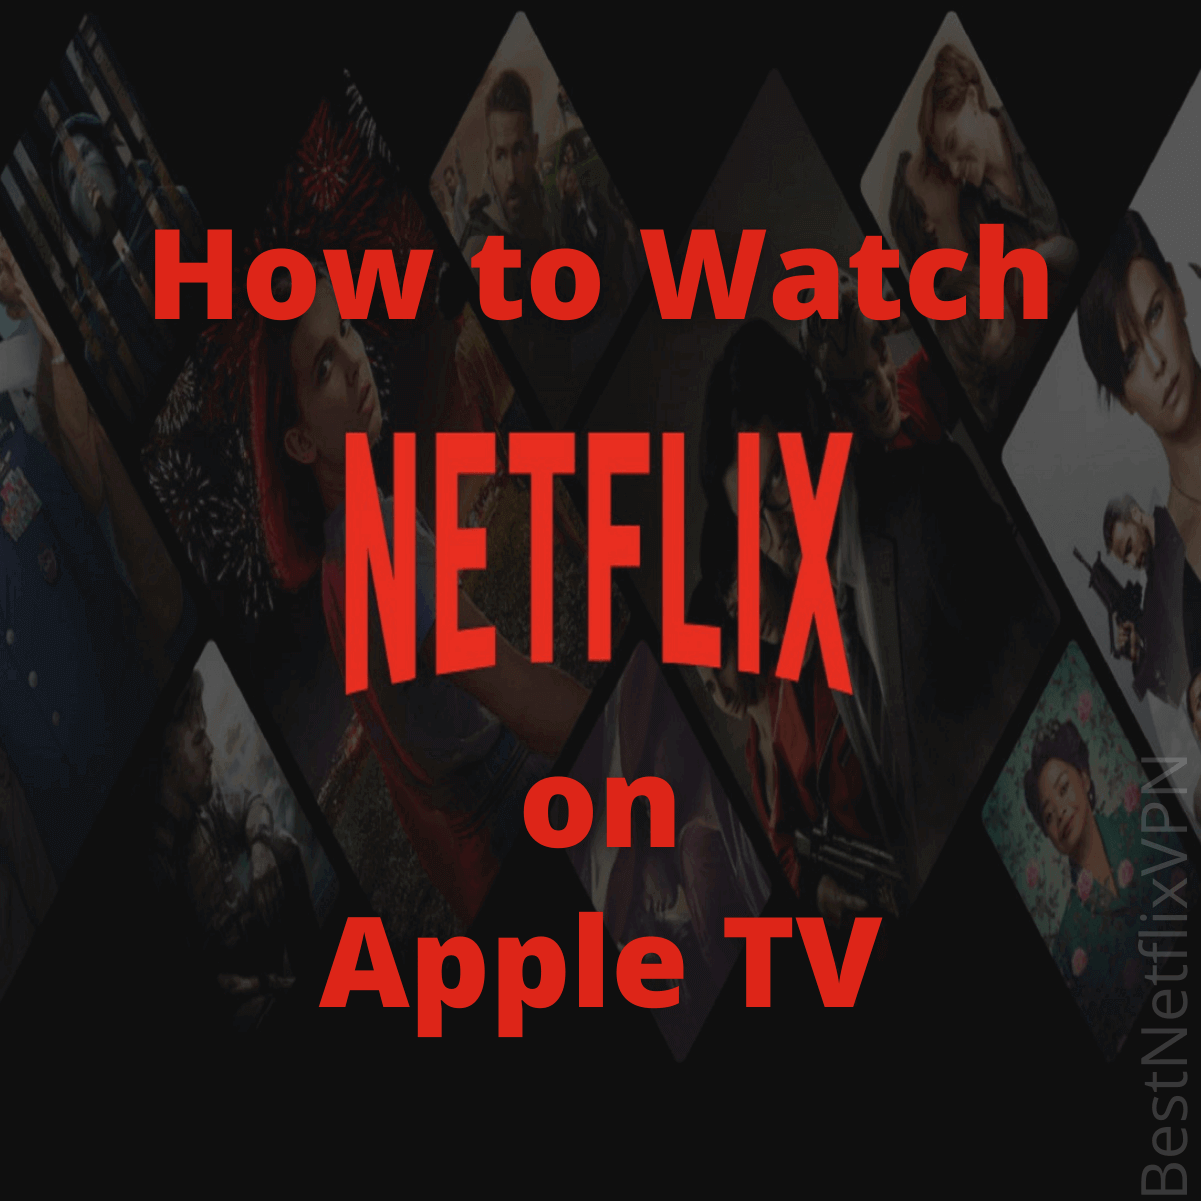 How to Watch Netflix on Apple TV in September 2021 Step by Step Guide